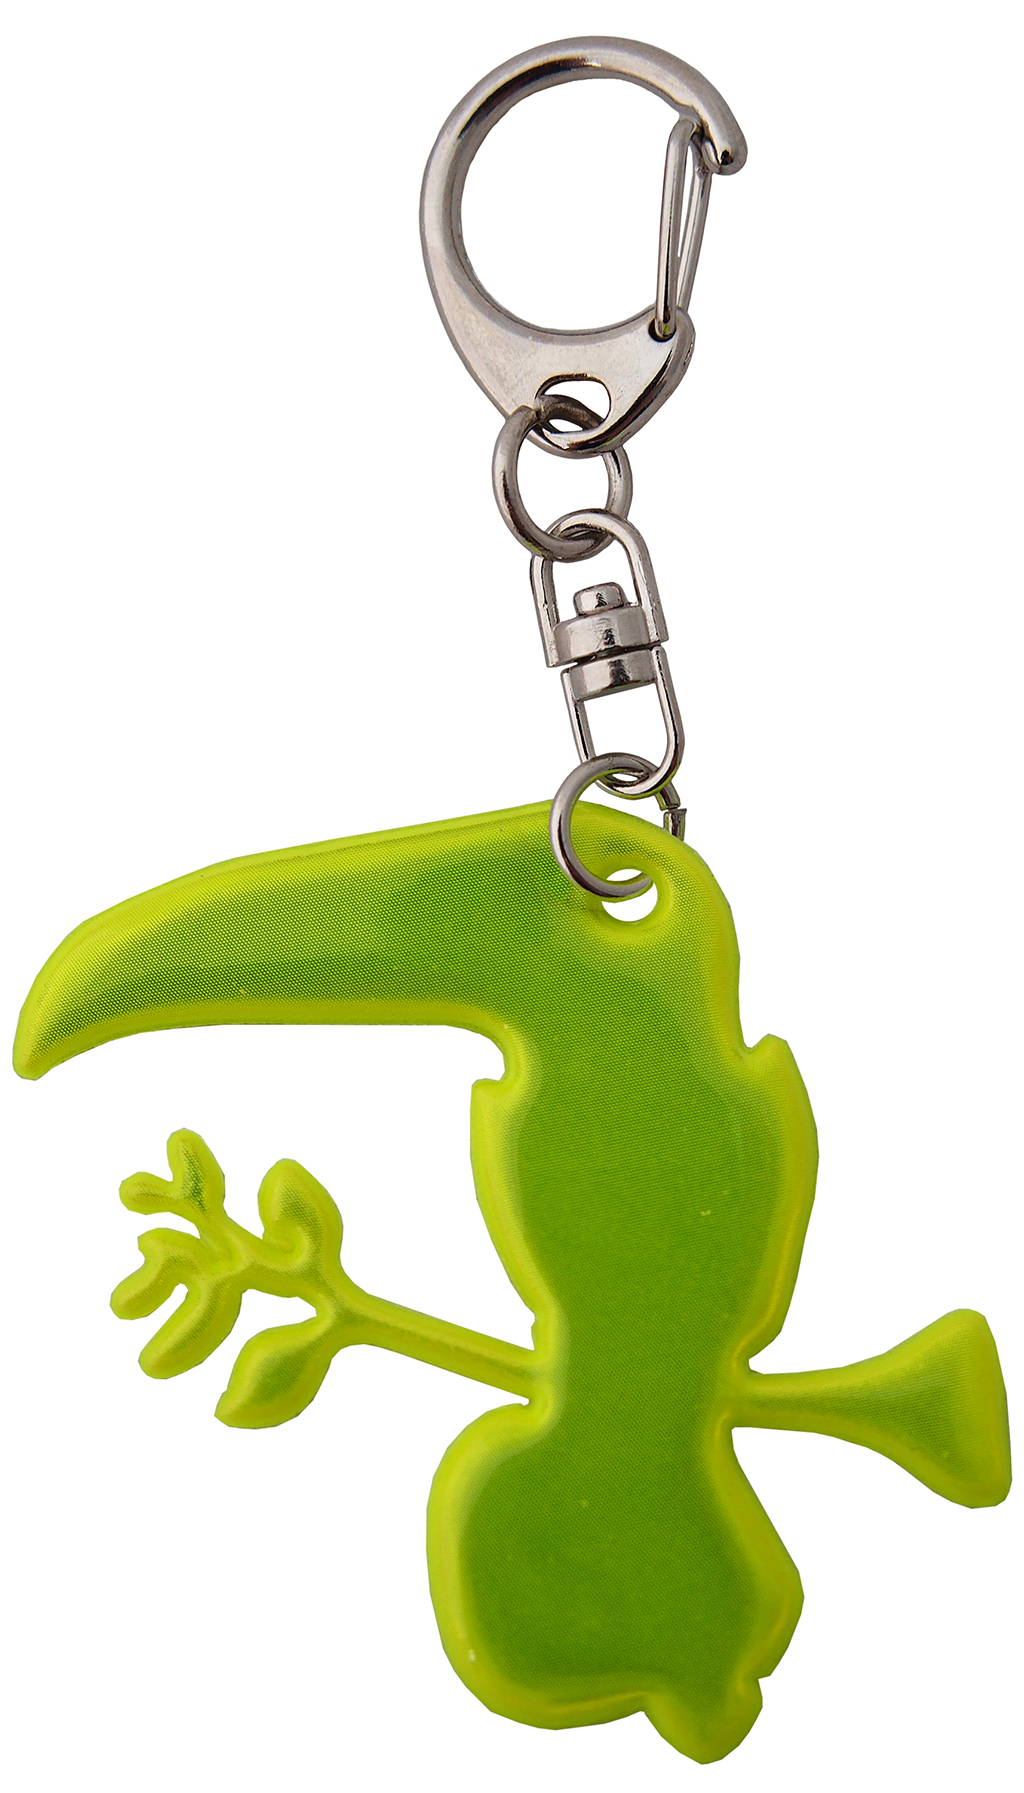 Reflective Keychain - Parrot